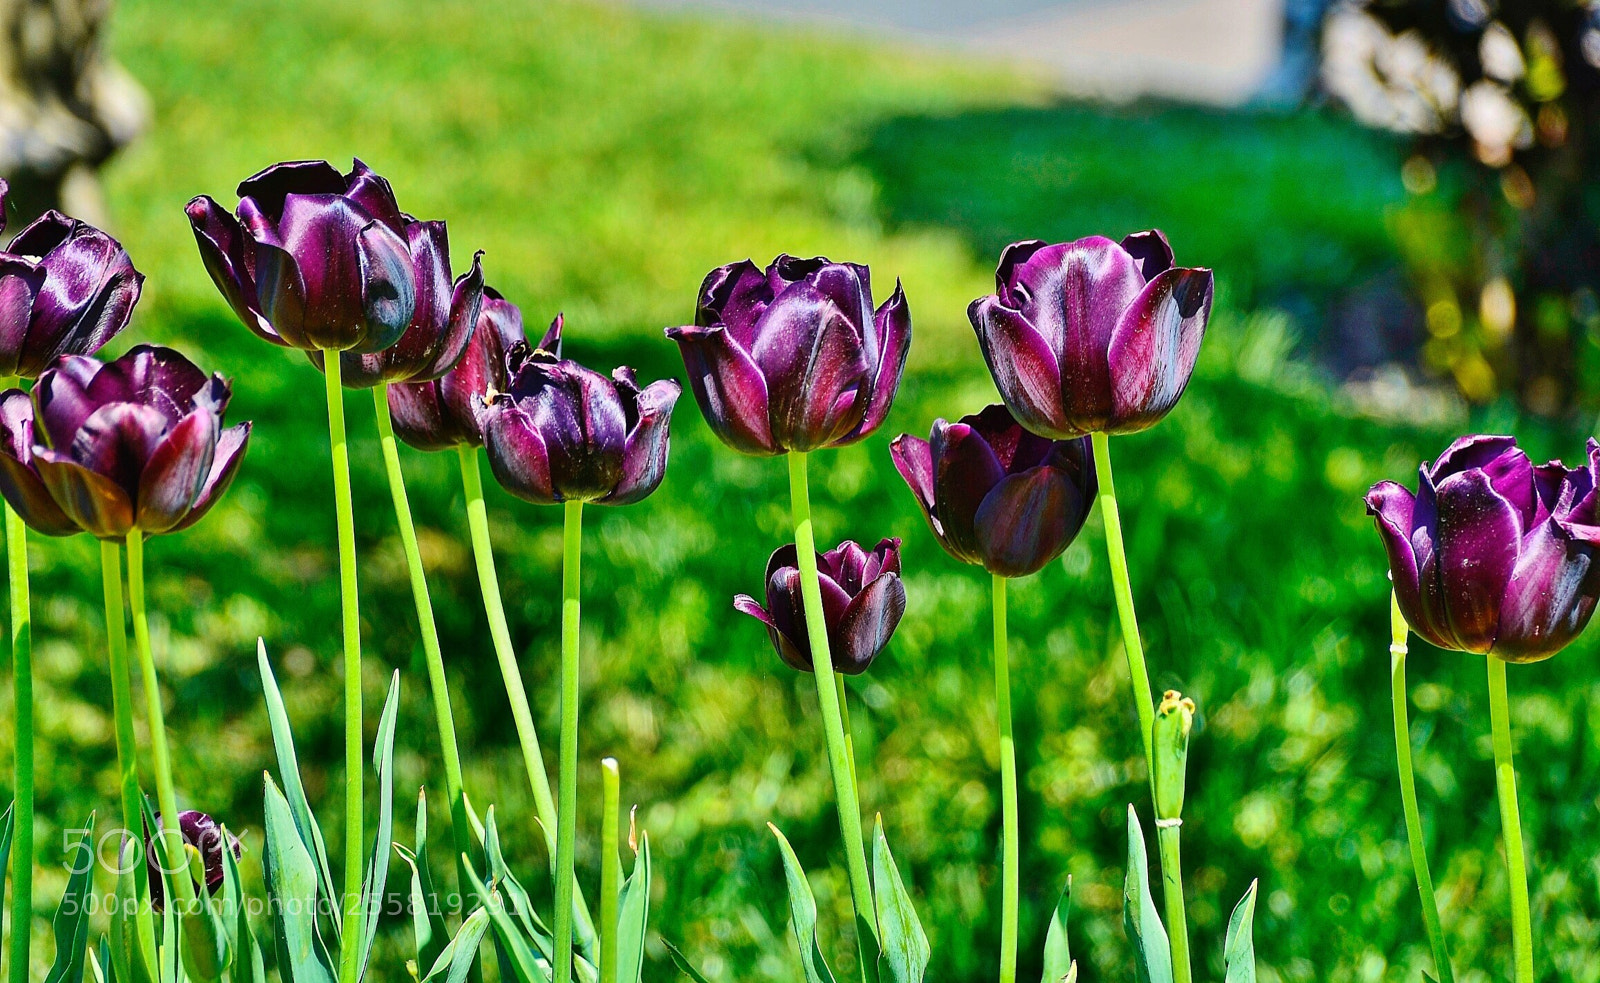 Nikon D7000 sample photo. Violet tulips from garden photography